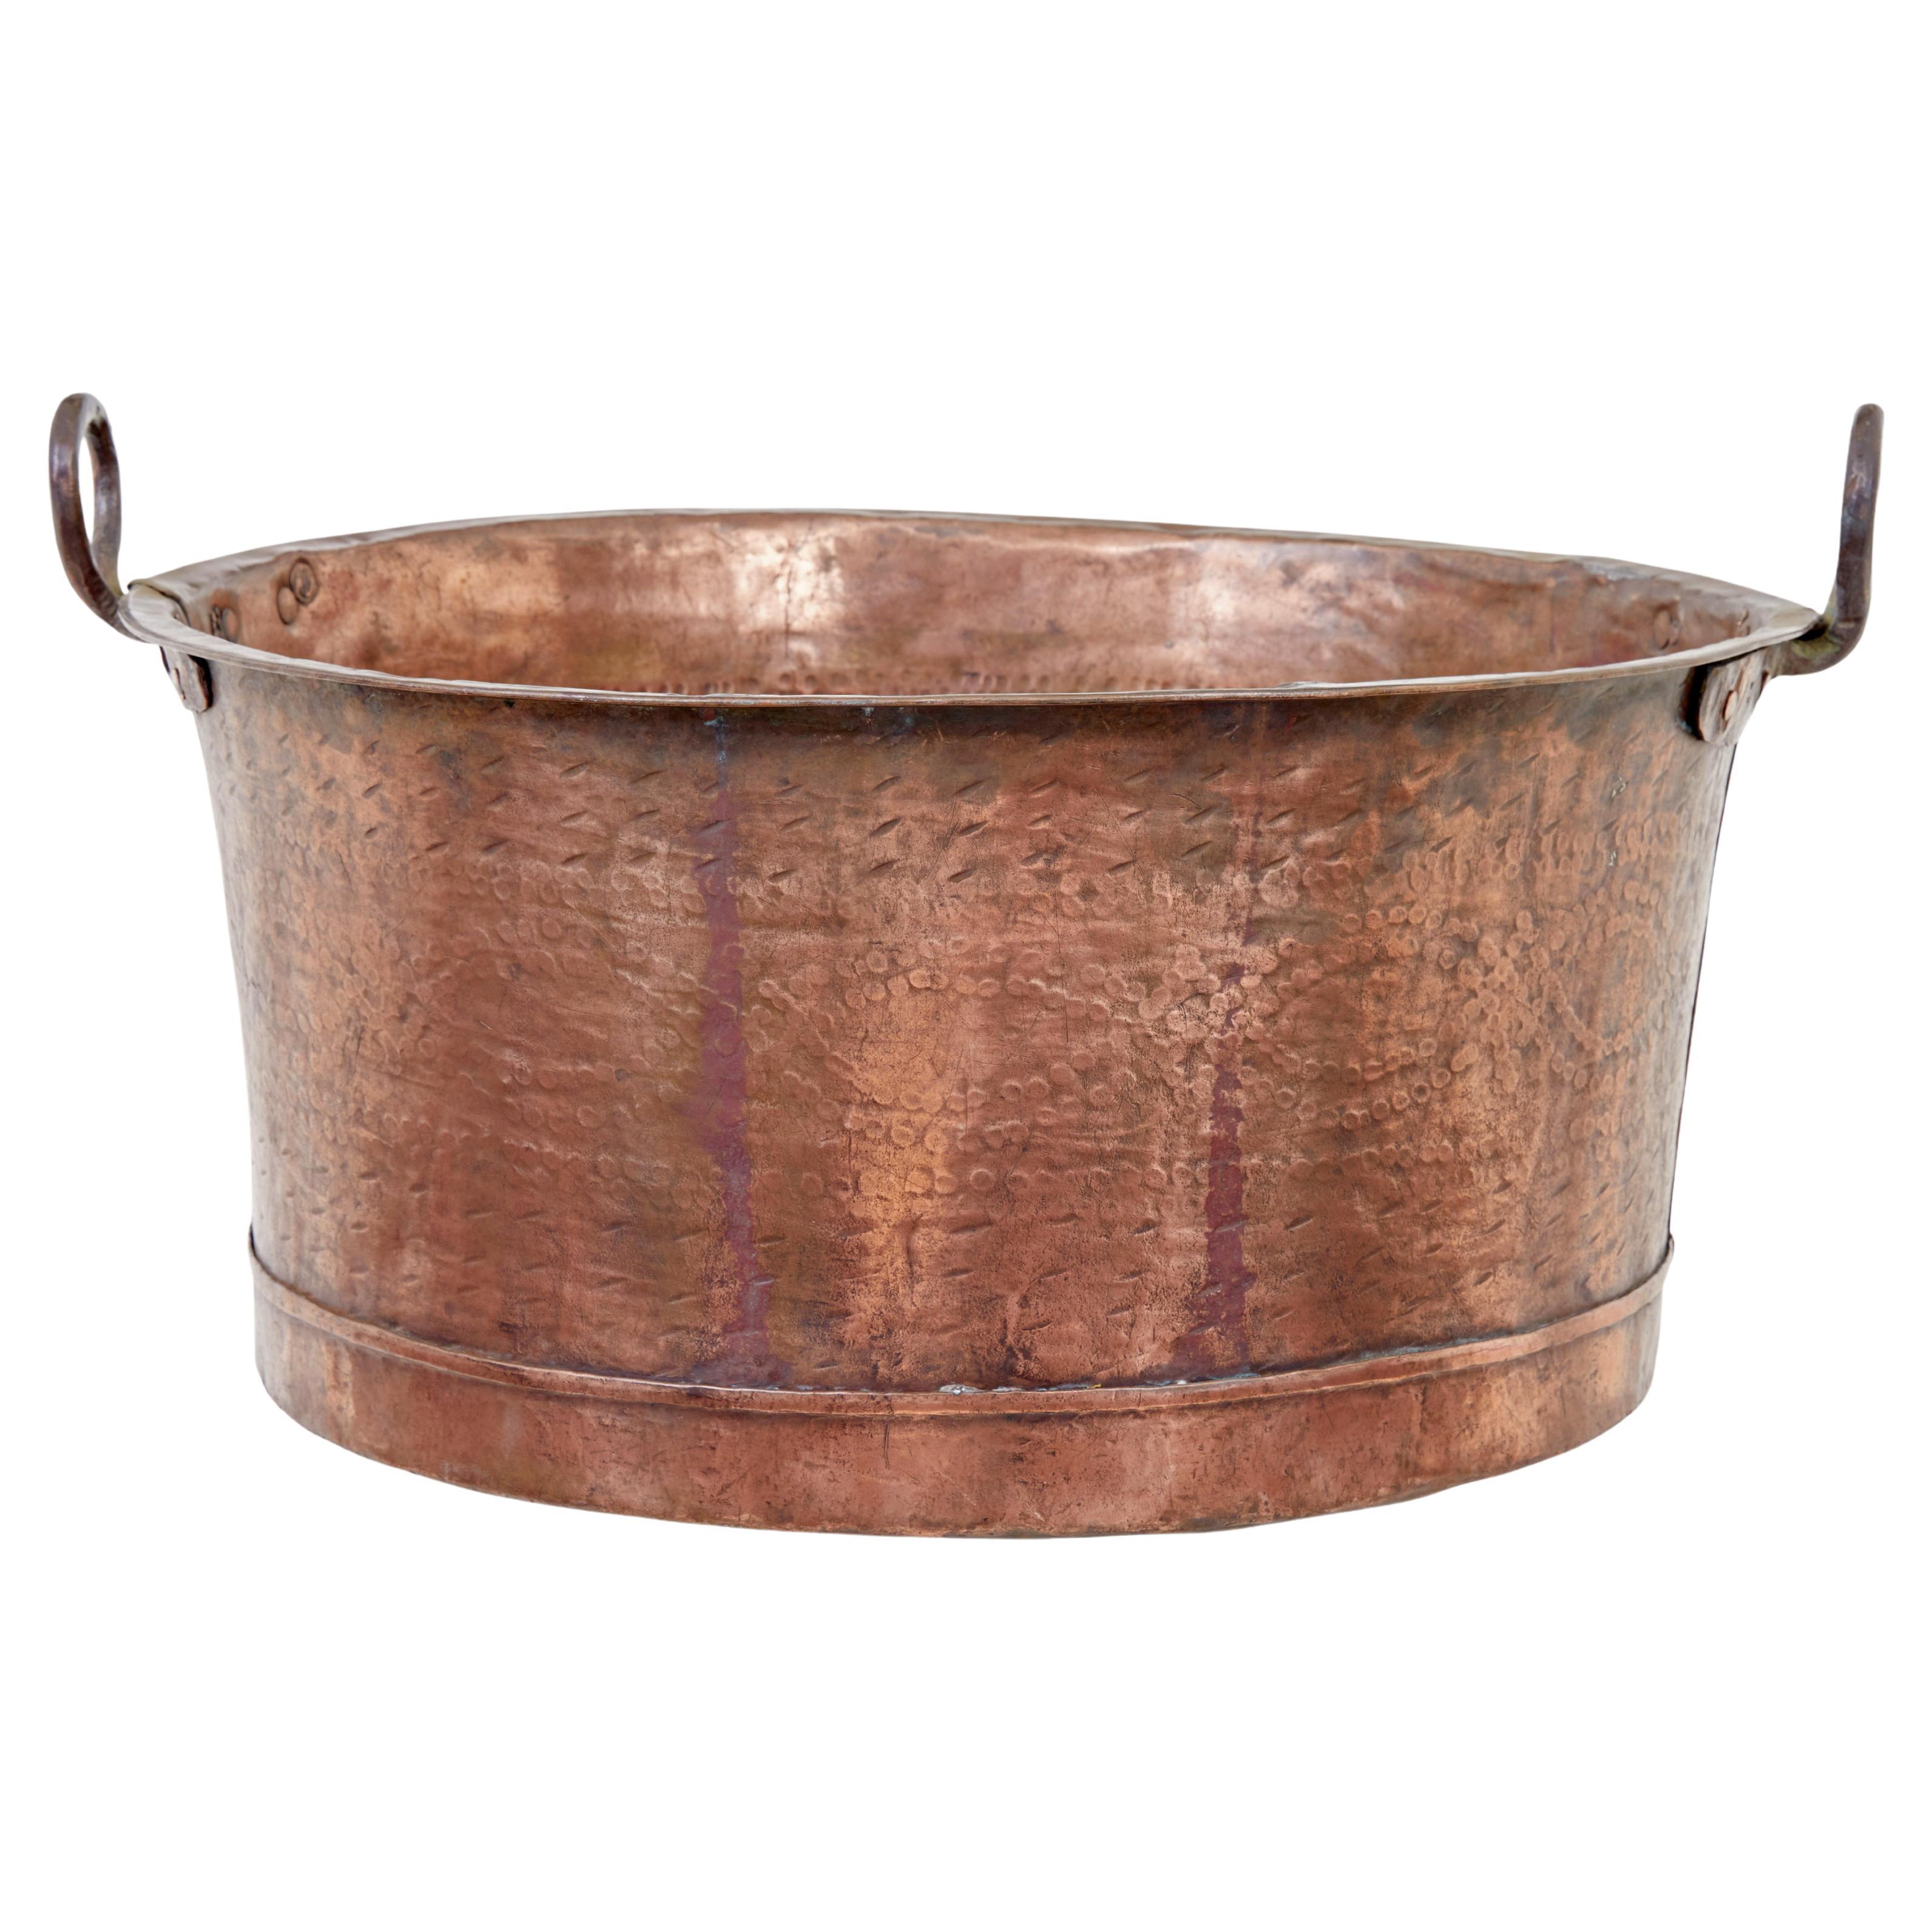 Victorian 19th century large copper cooking pot